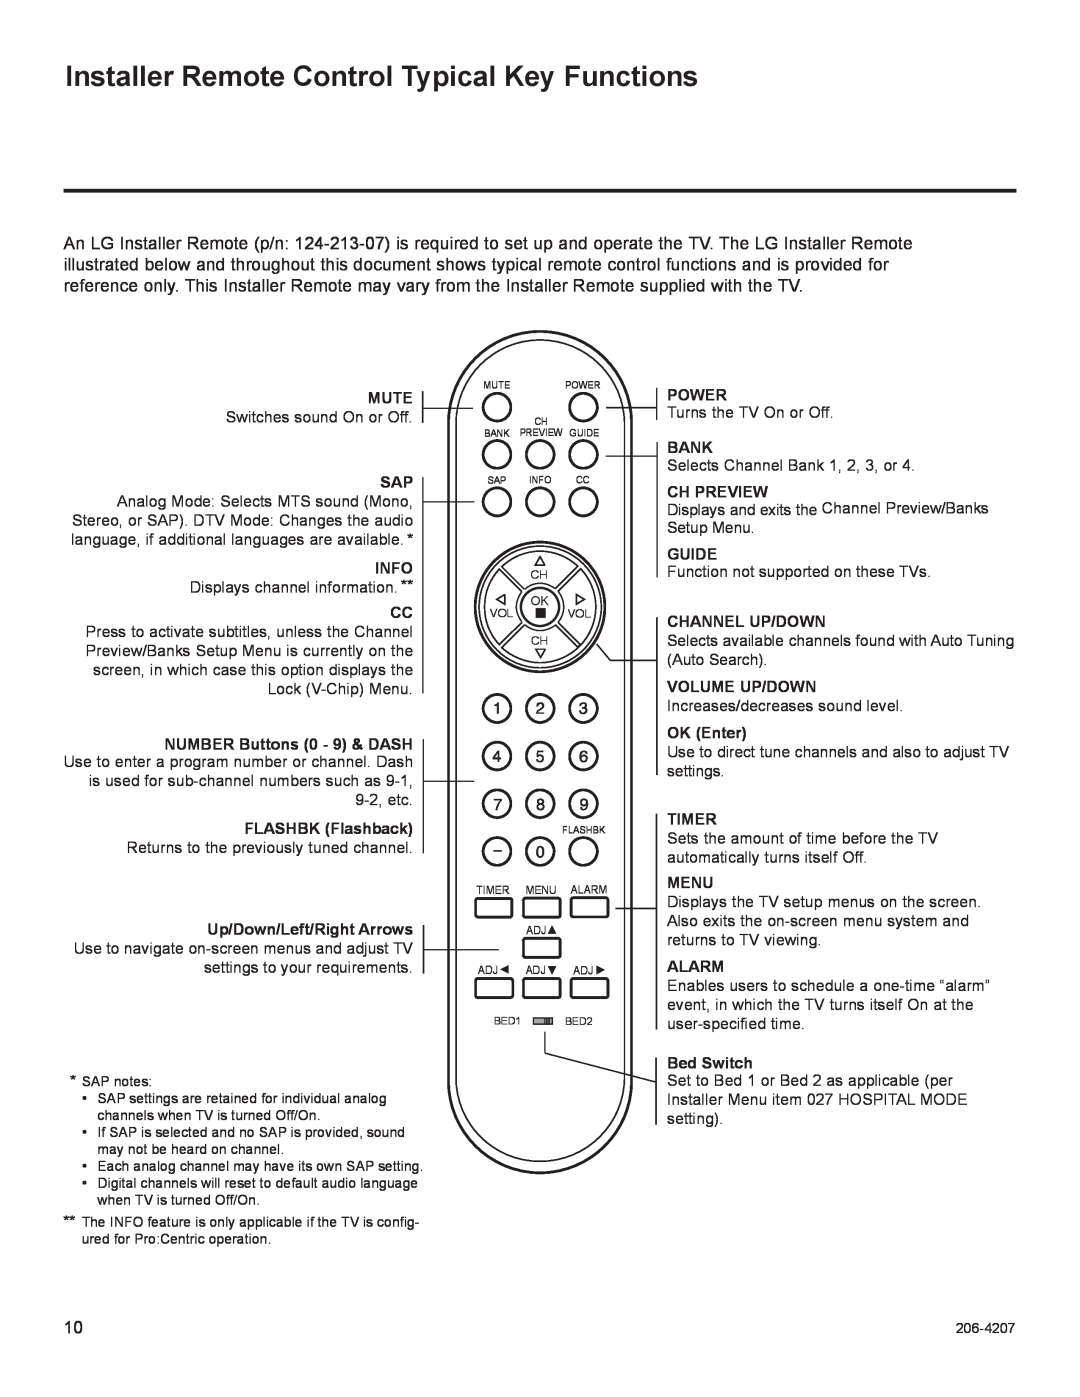 LG Electronics 26LQ630H Installer Remote Control Typical Key Functions, Mute, Info, Power, Bank, Ch Preview, Guide, Timer 